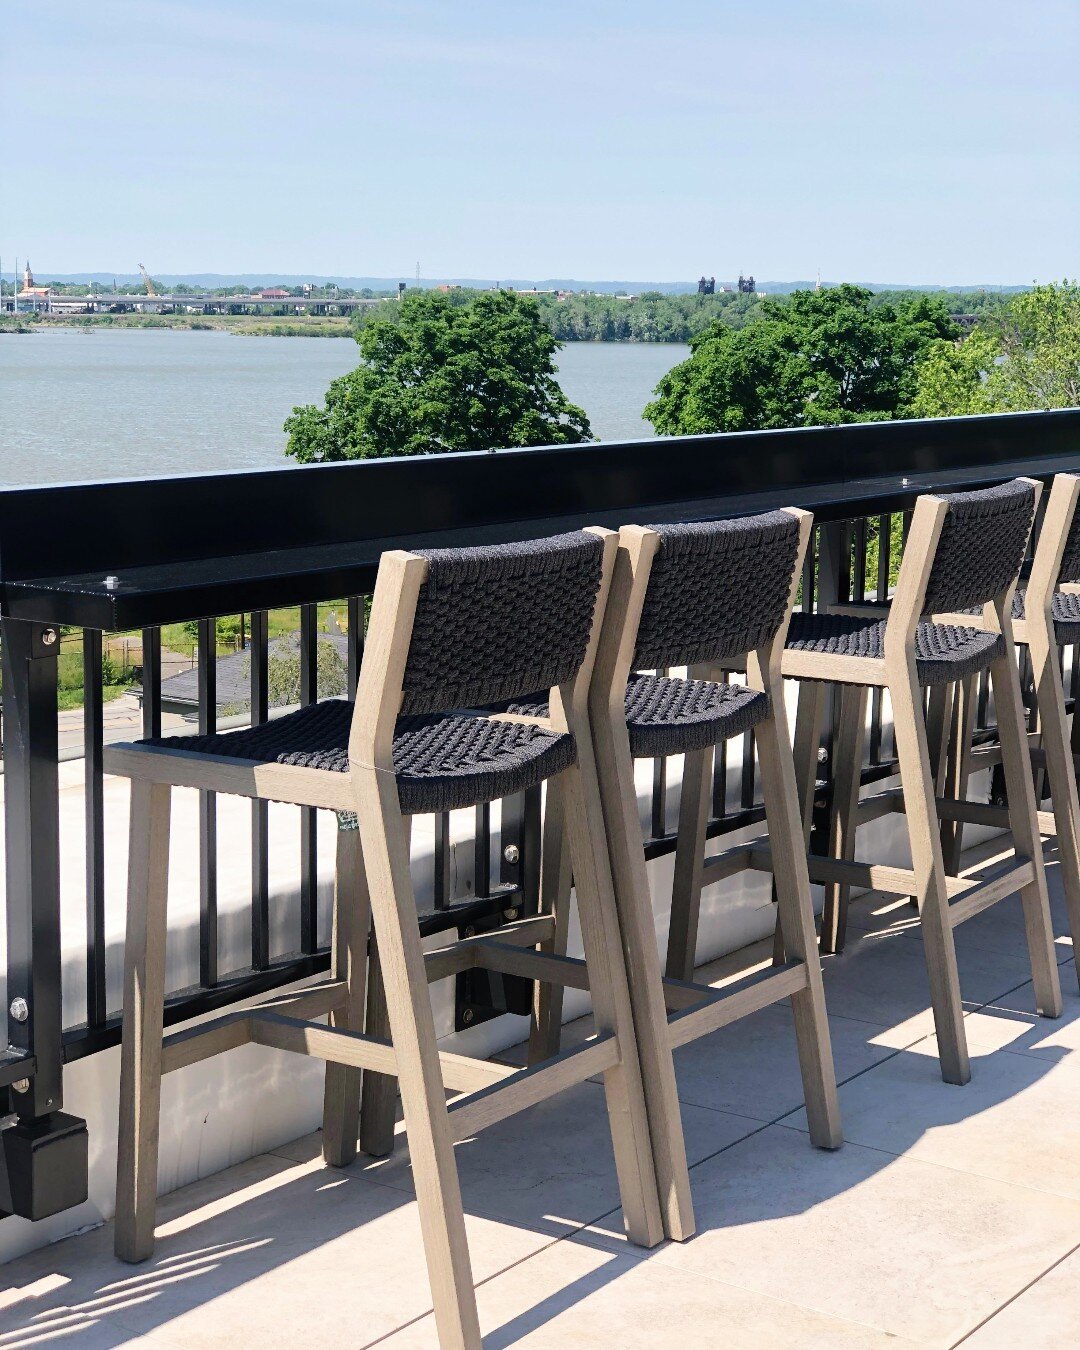 The perfect hangout spot located on our rooftop lounge! Check out all of our amenities on our website! #LinkInBio #ItsTheRooftopForMe #BoltAndTie #SouthernIndiana